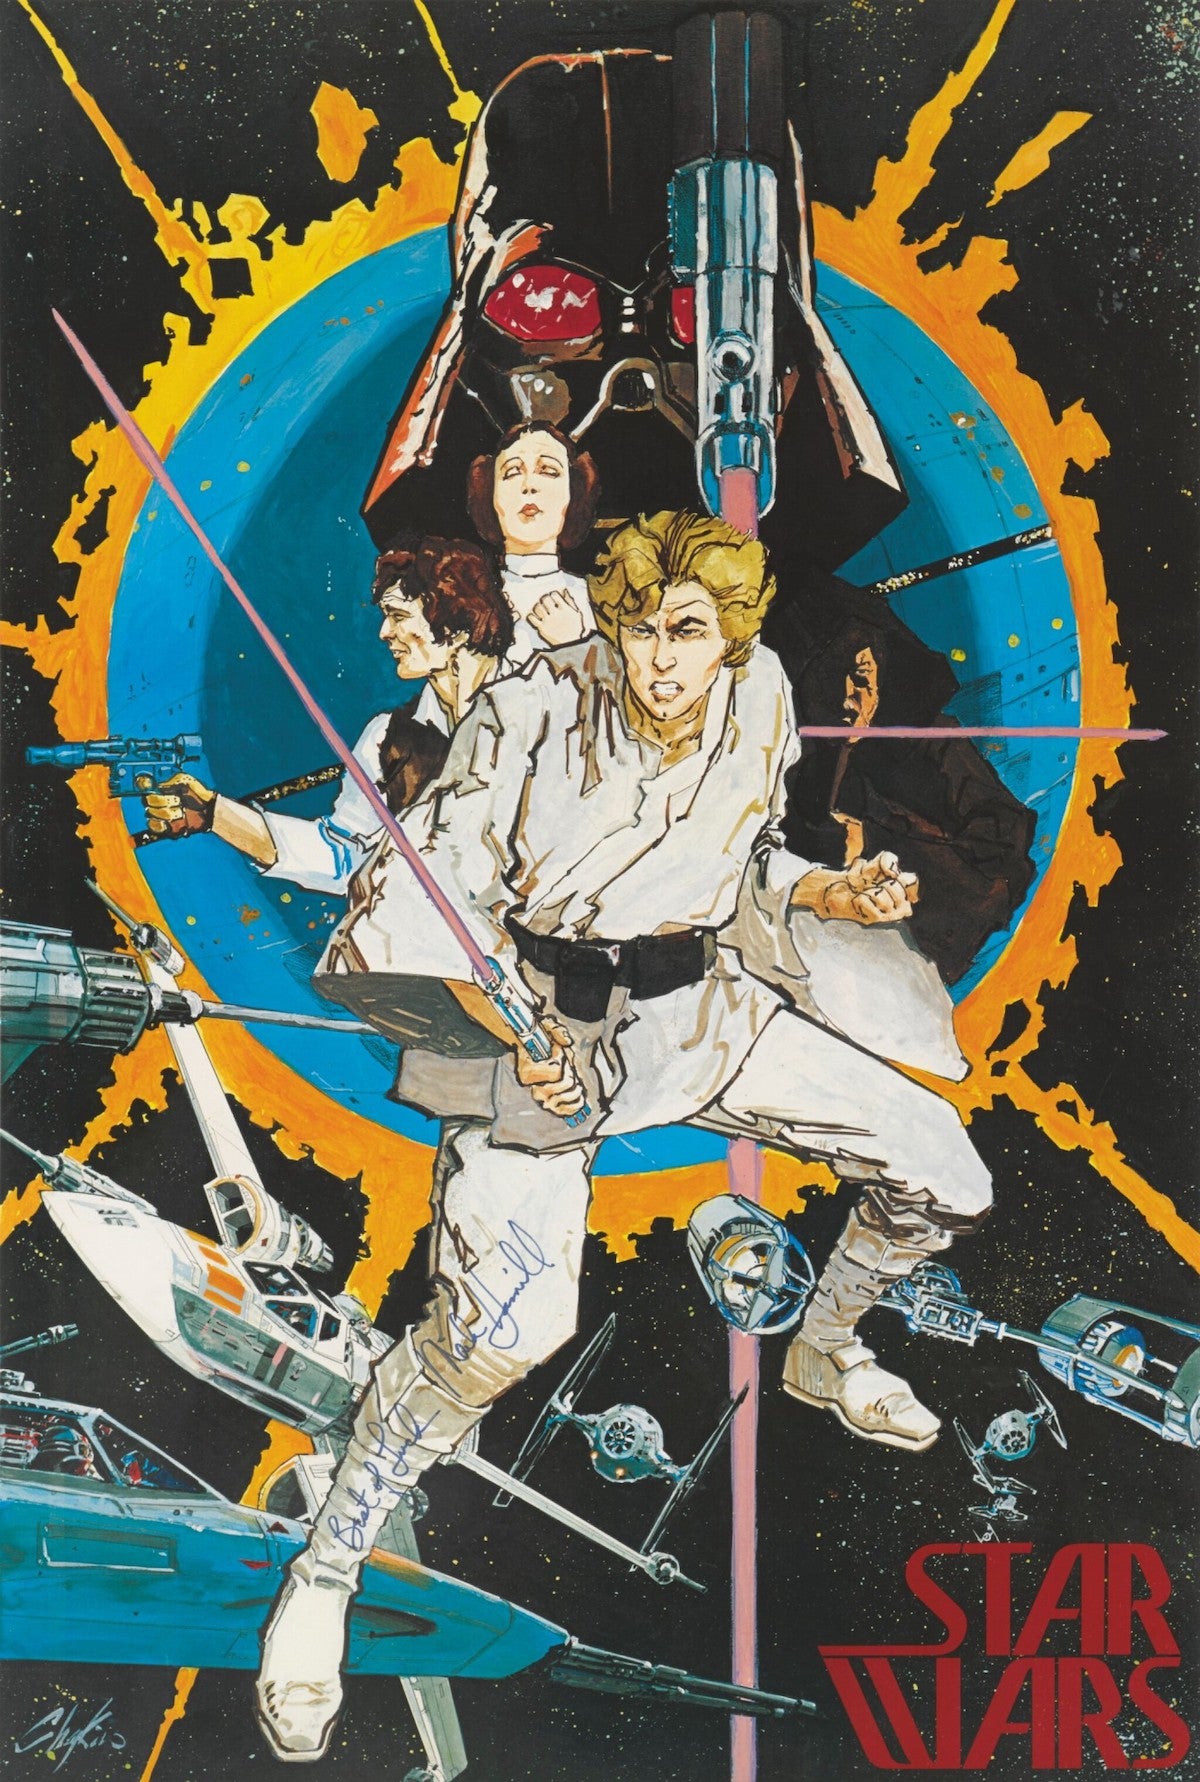 San Diego Comic-Con Star Wars Promotional Poster by Howard Chaykin